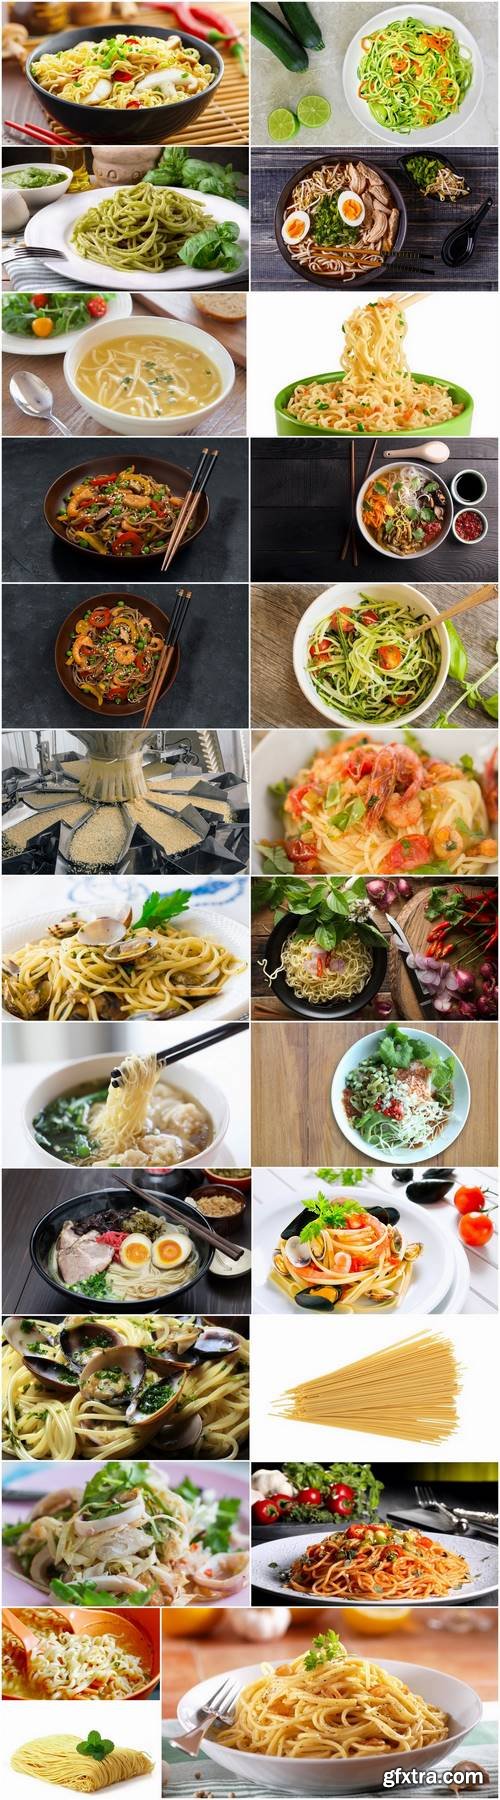 Vermicelli noodles soup pasta spaghetti food meal 25 HQ Jpeg